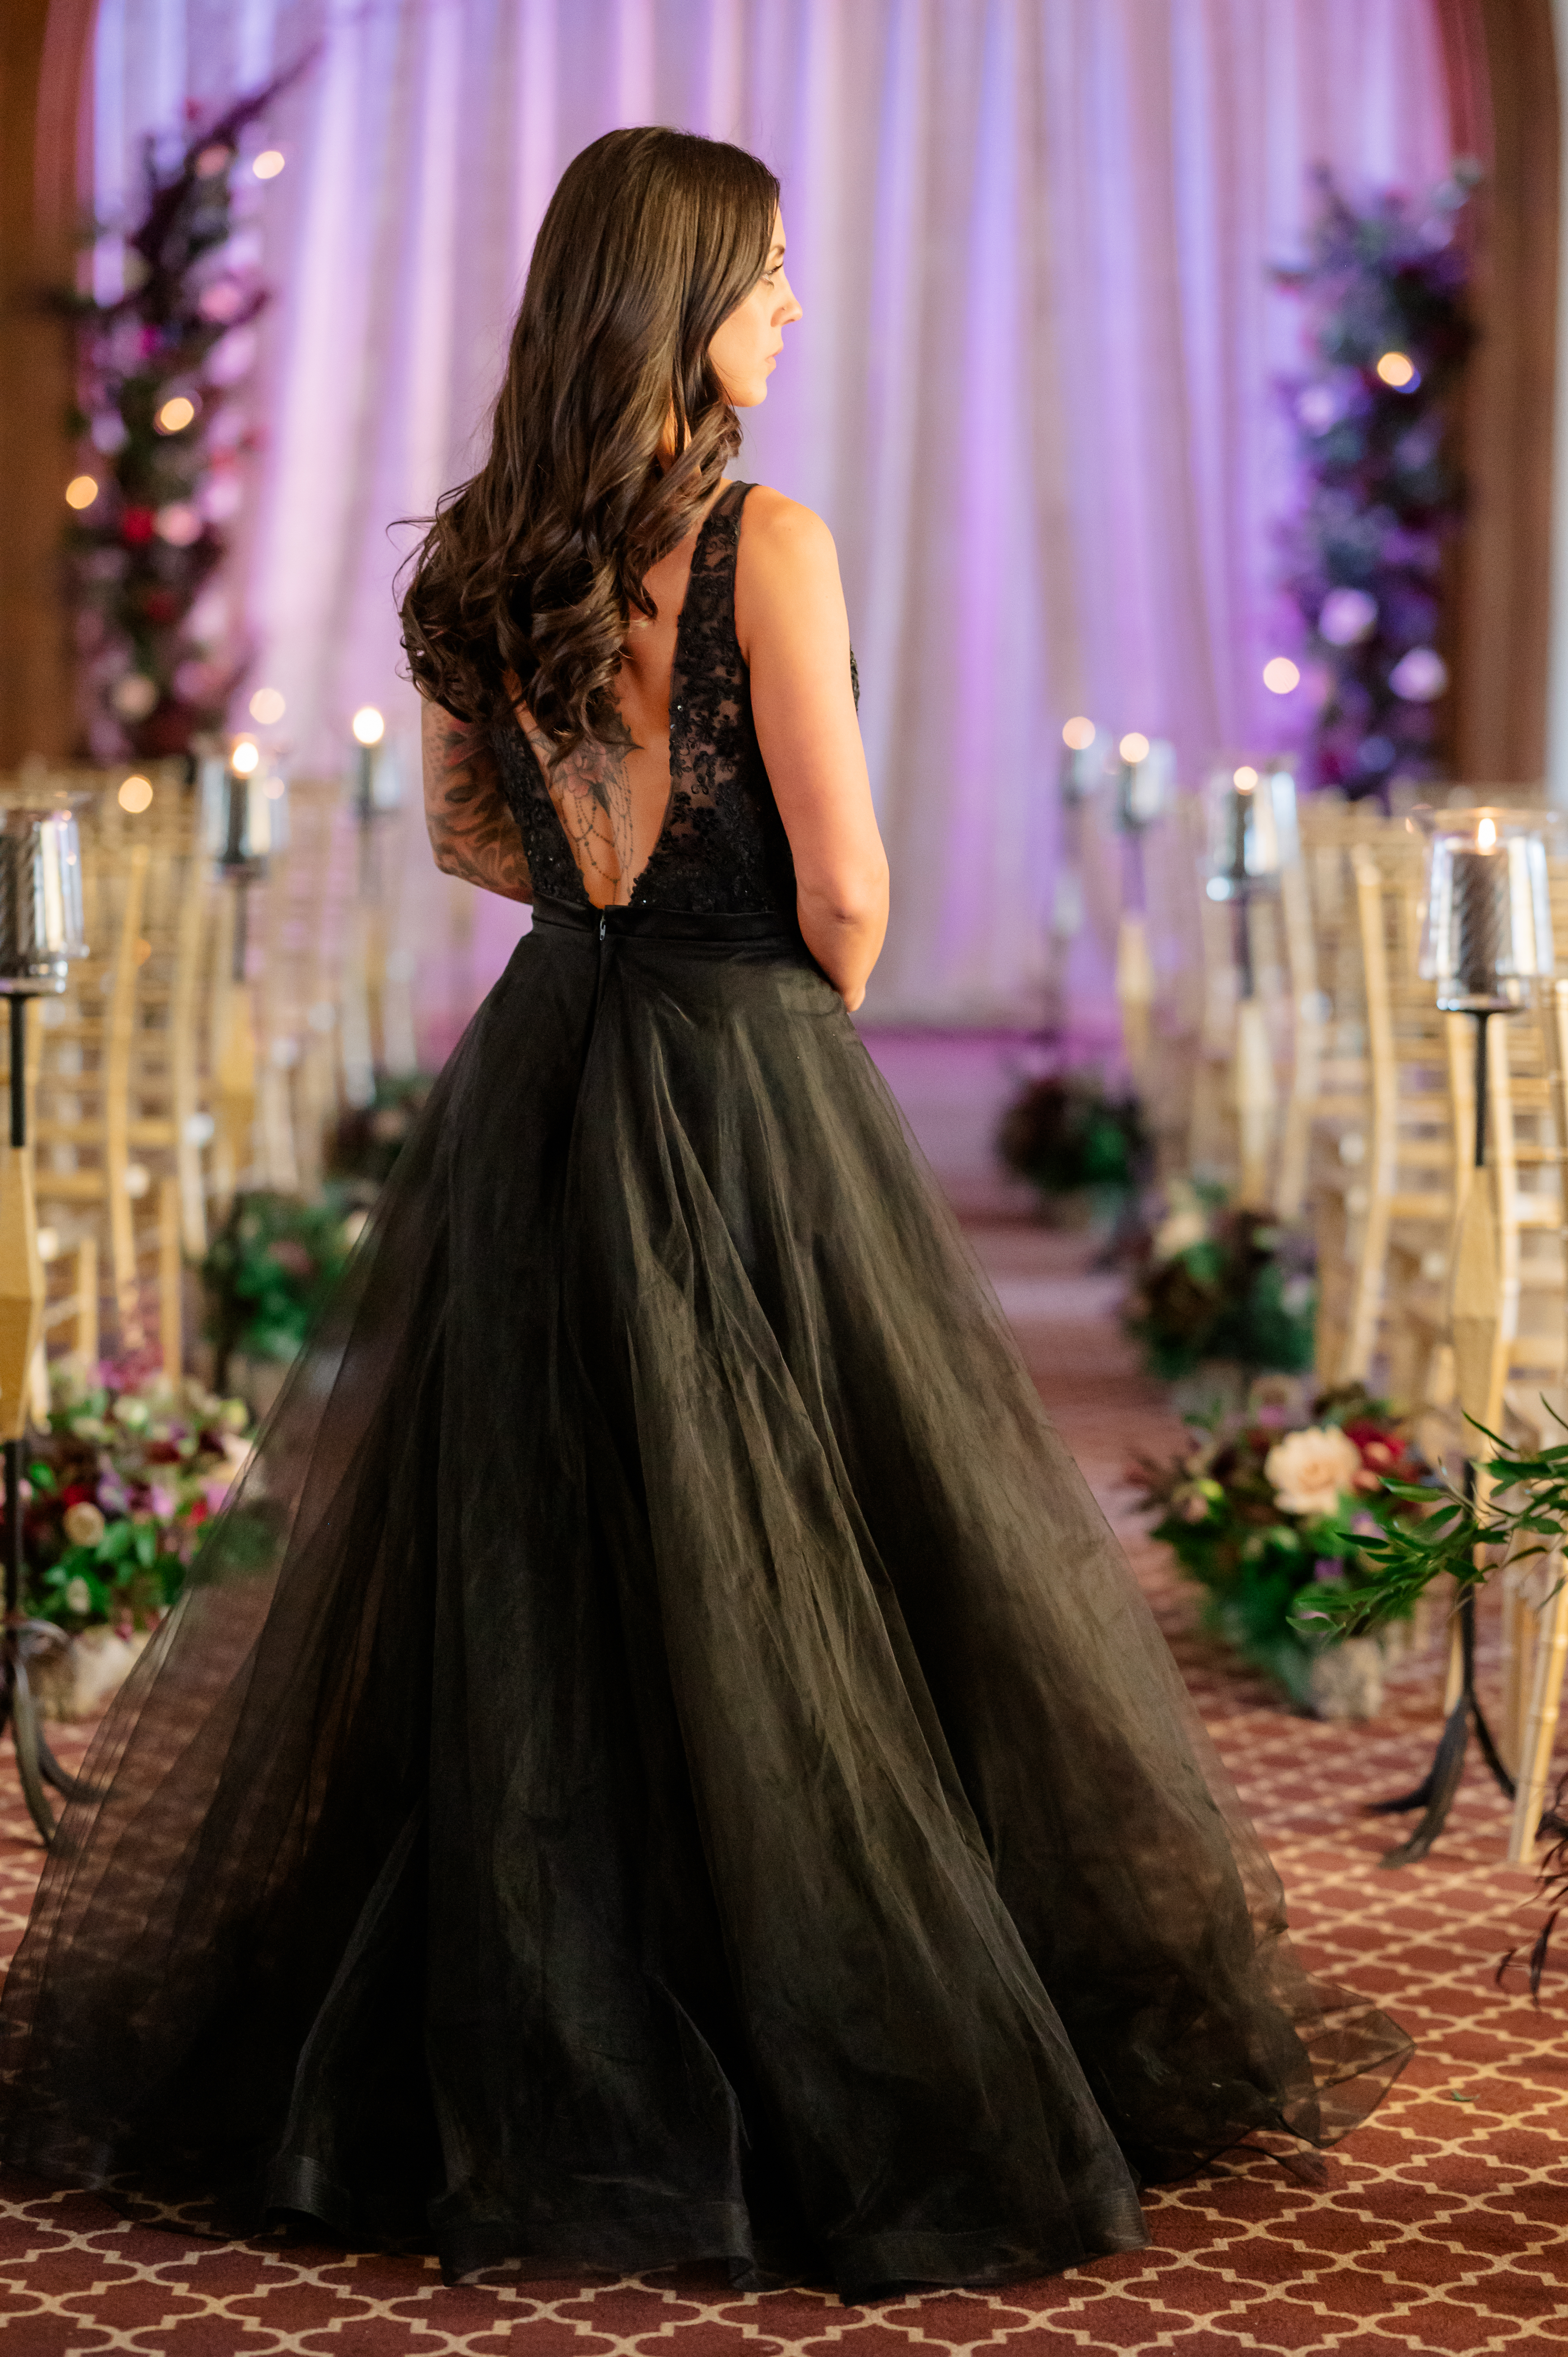 "Stunning bride adorned in a chic black wedding gown, radiating elegance and modern sophistication on her special day."